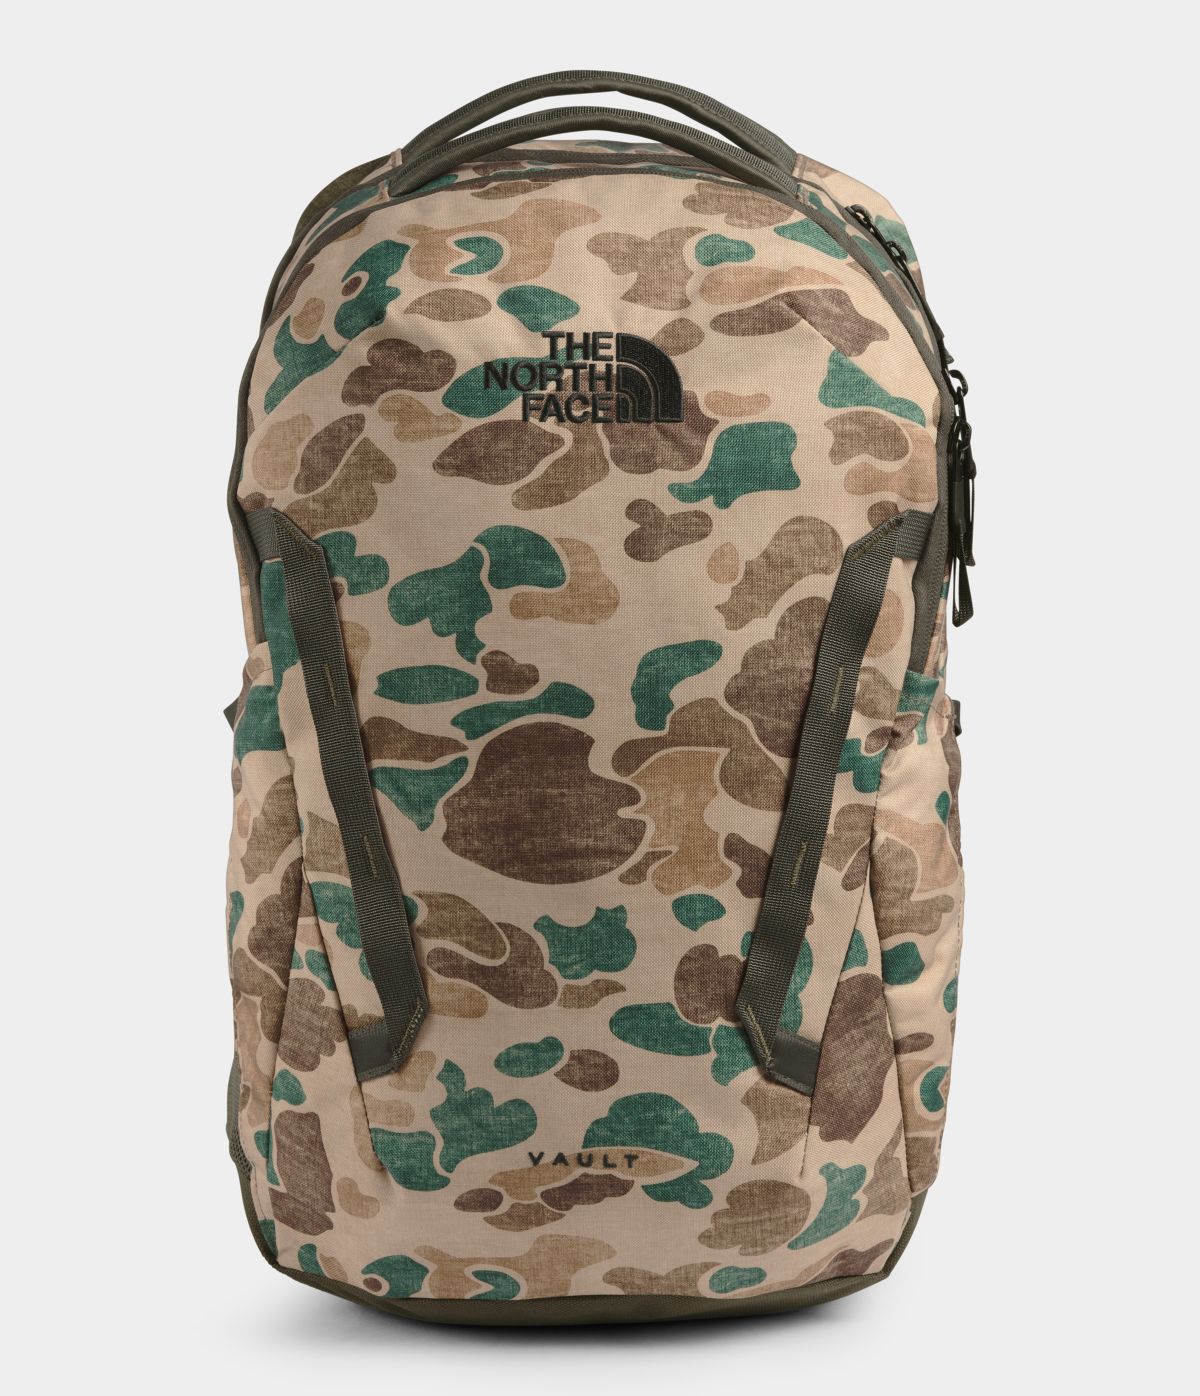 Unisex The North Face Vault Backpack in Hawthorne Khaki Duck Camo Print/New Taupe Green from front view